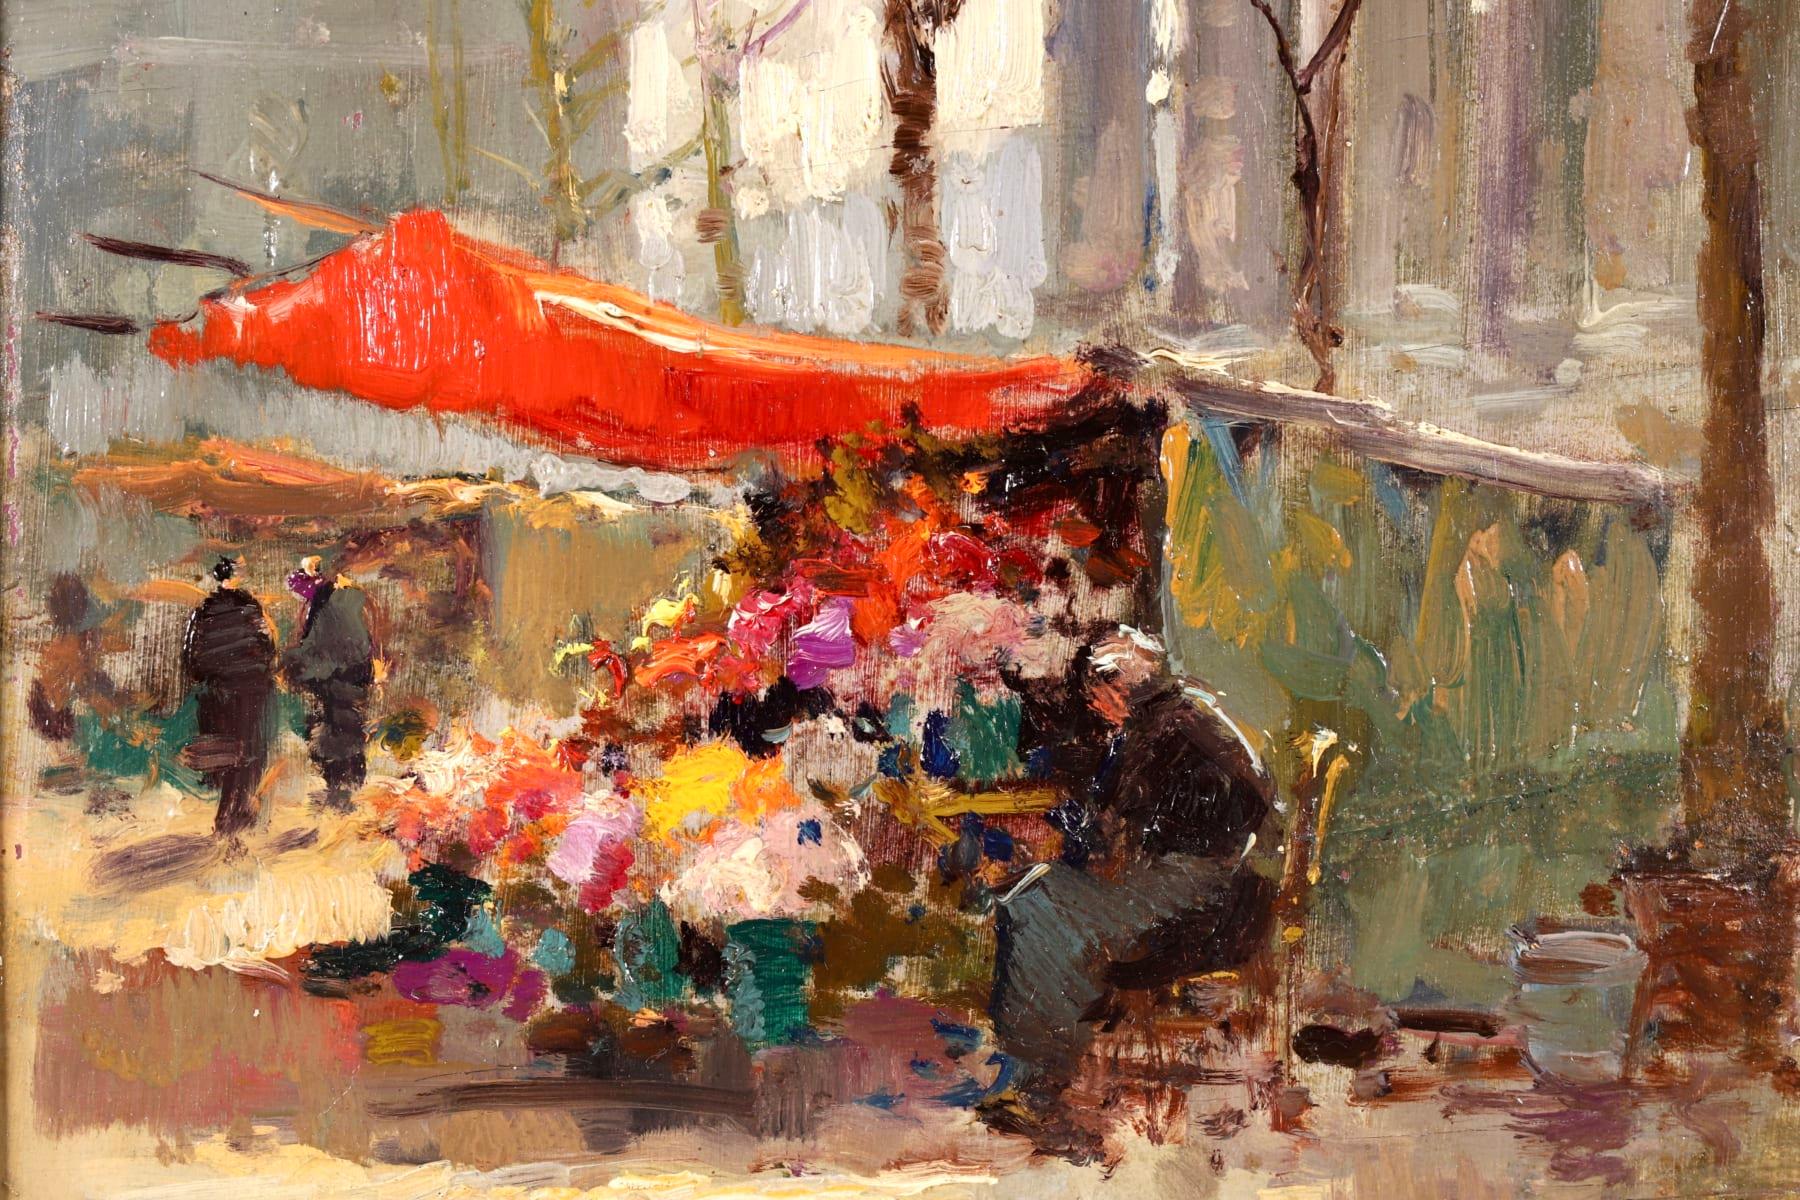 A beautiful oil on panel circa 1930 by sought after French impressionist painter Edouard Leon Cortes. The piece depicts a flower marker seller outside Madeleine Church in Paris, France on a winter's day with the bare trees visible behind the